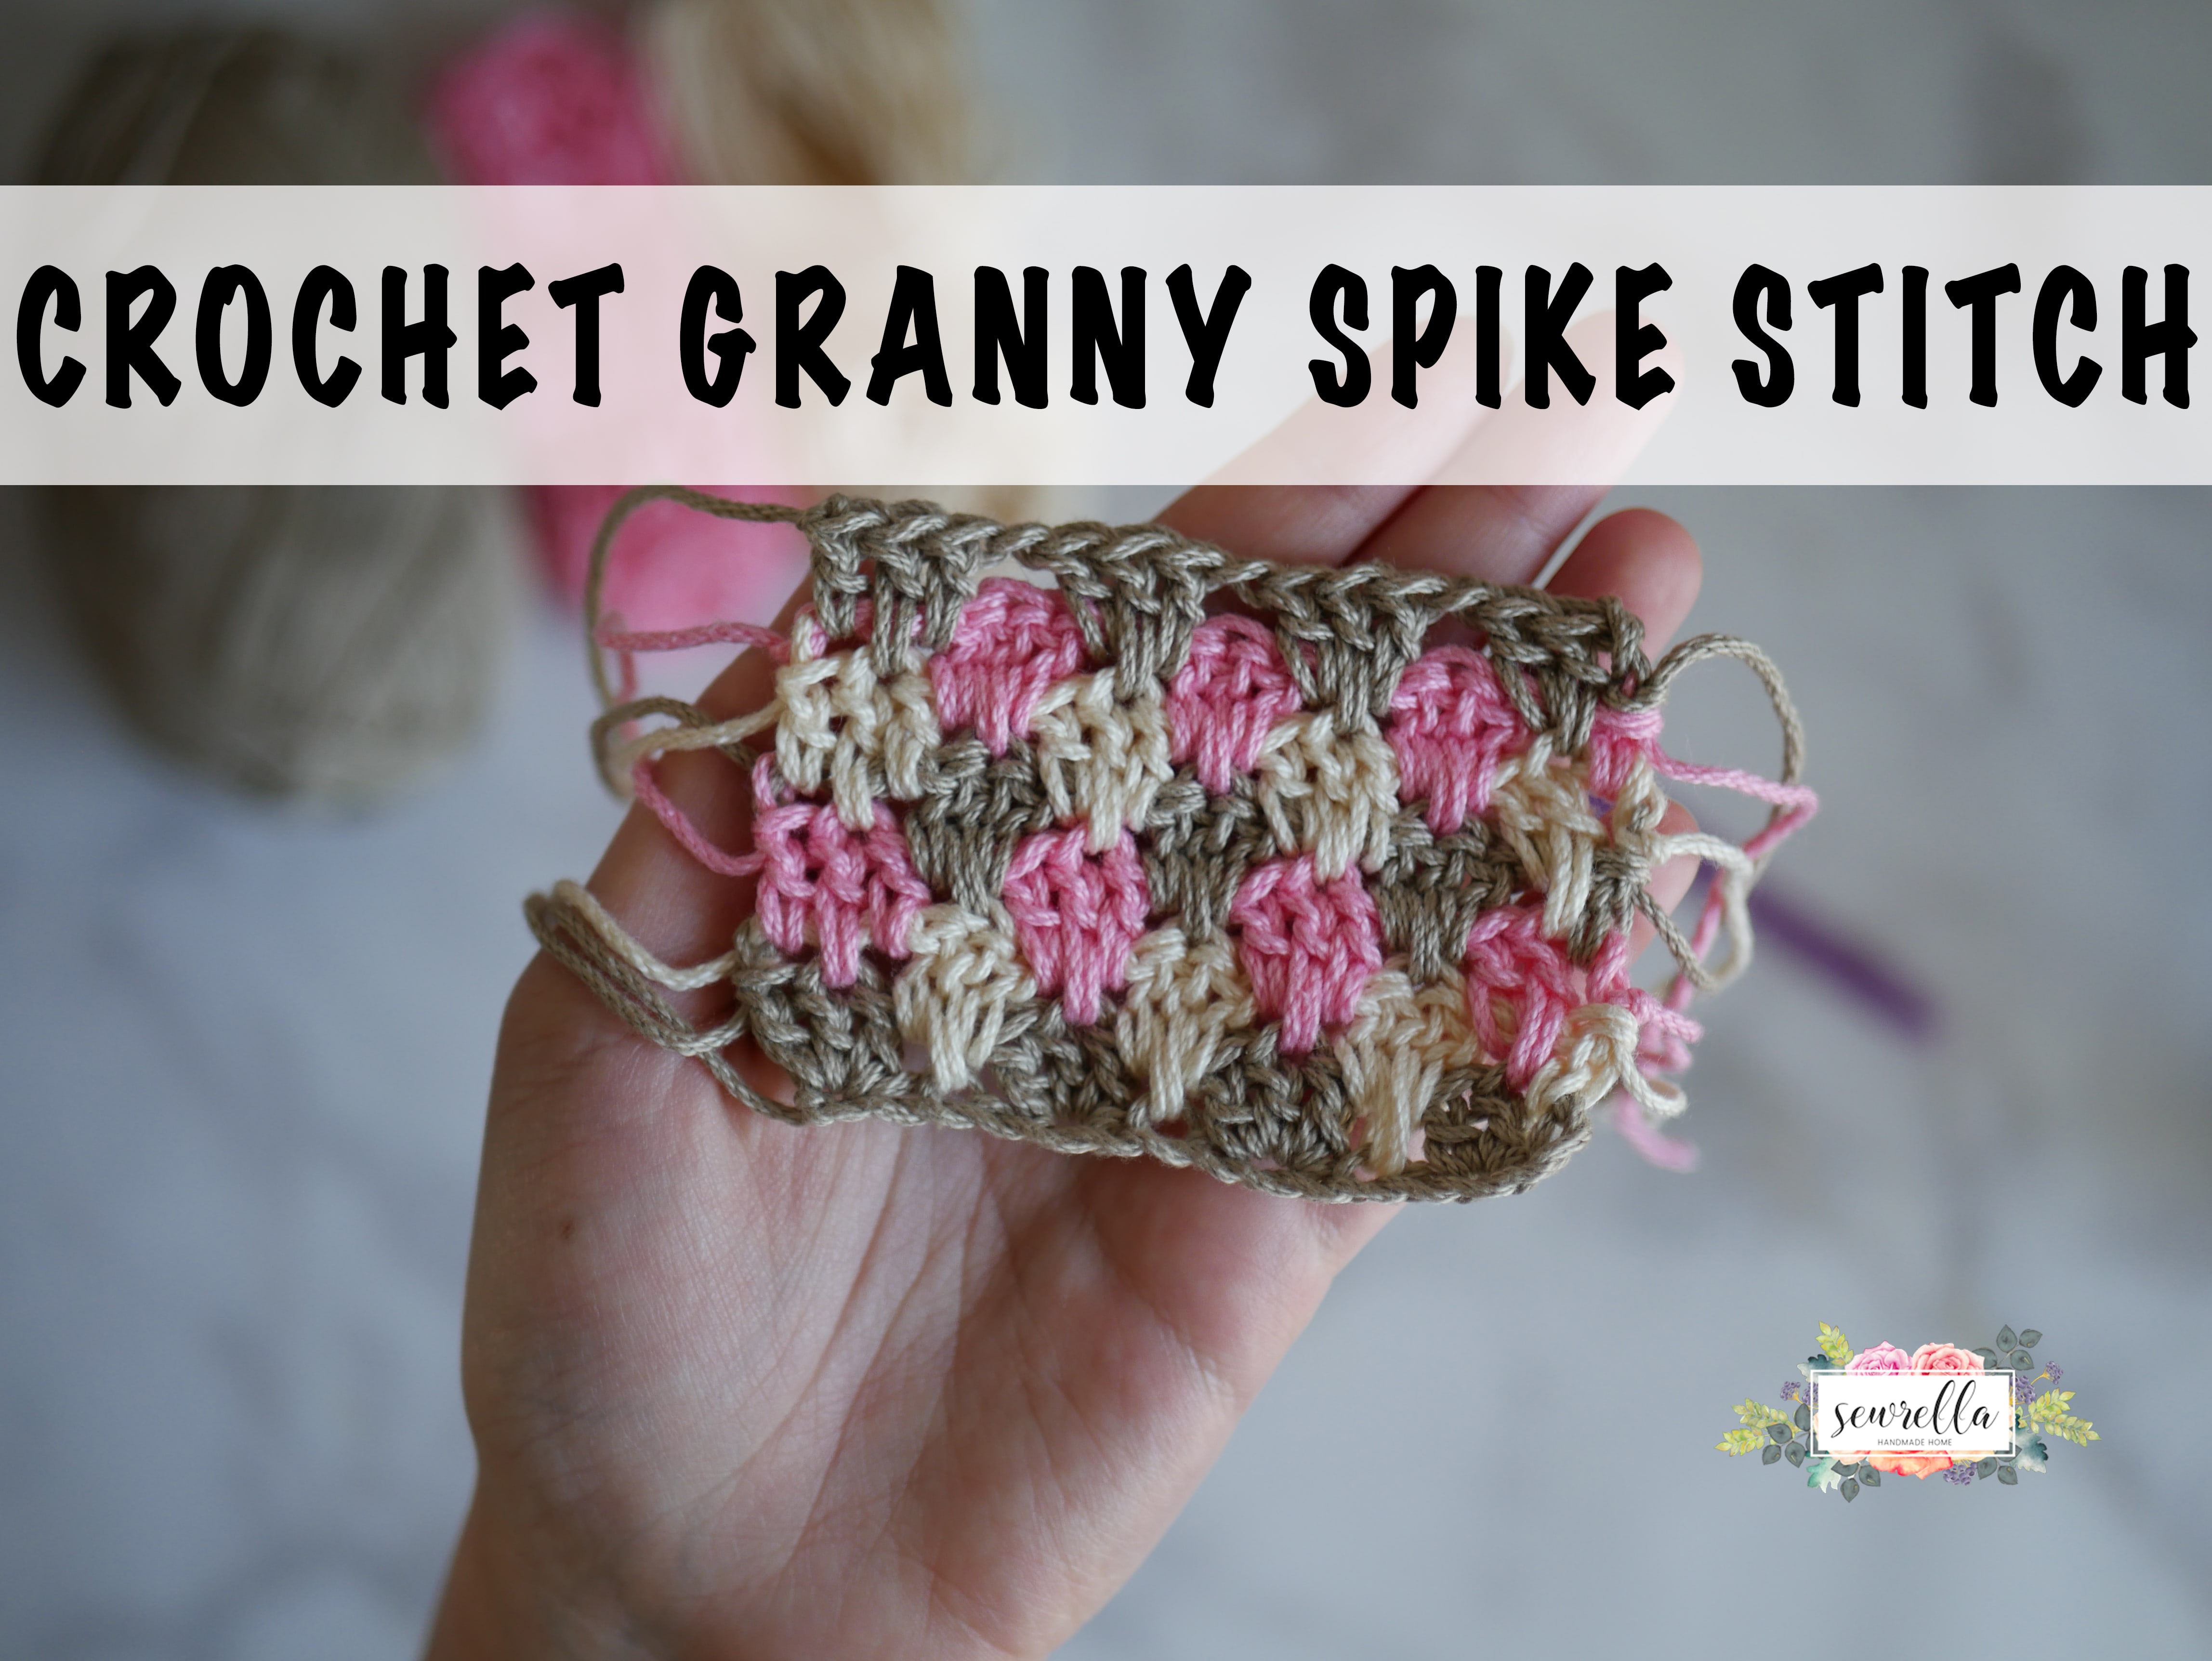 Granny Spike Crochet Stitch Free Pattern and Video tutorial